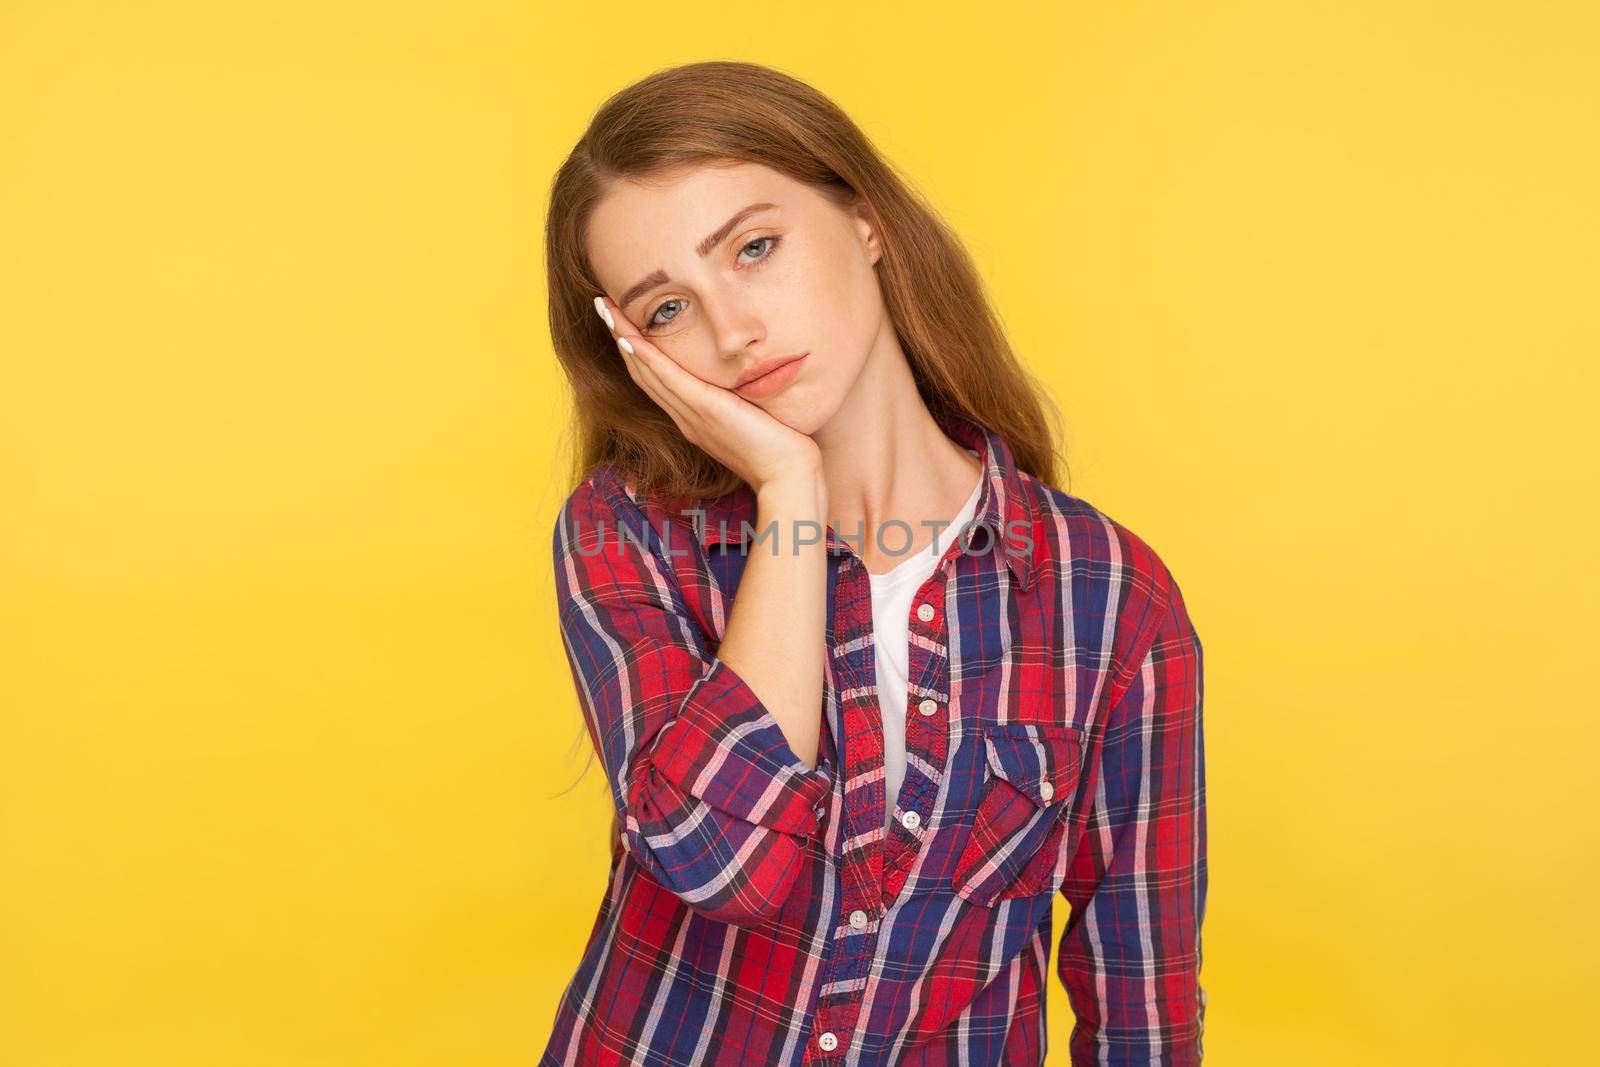 I'm bored. Portrait of depressed ginger girl in checkered shirt leaning on cheek and looking with indifferent dull expression, tired of boring story. indoor studio shot isolated on yellow background